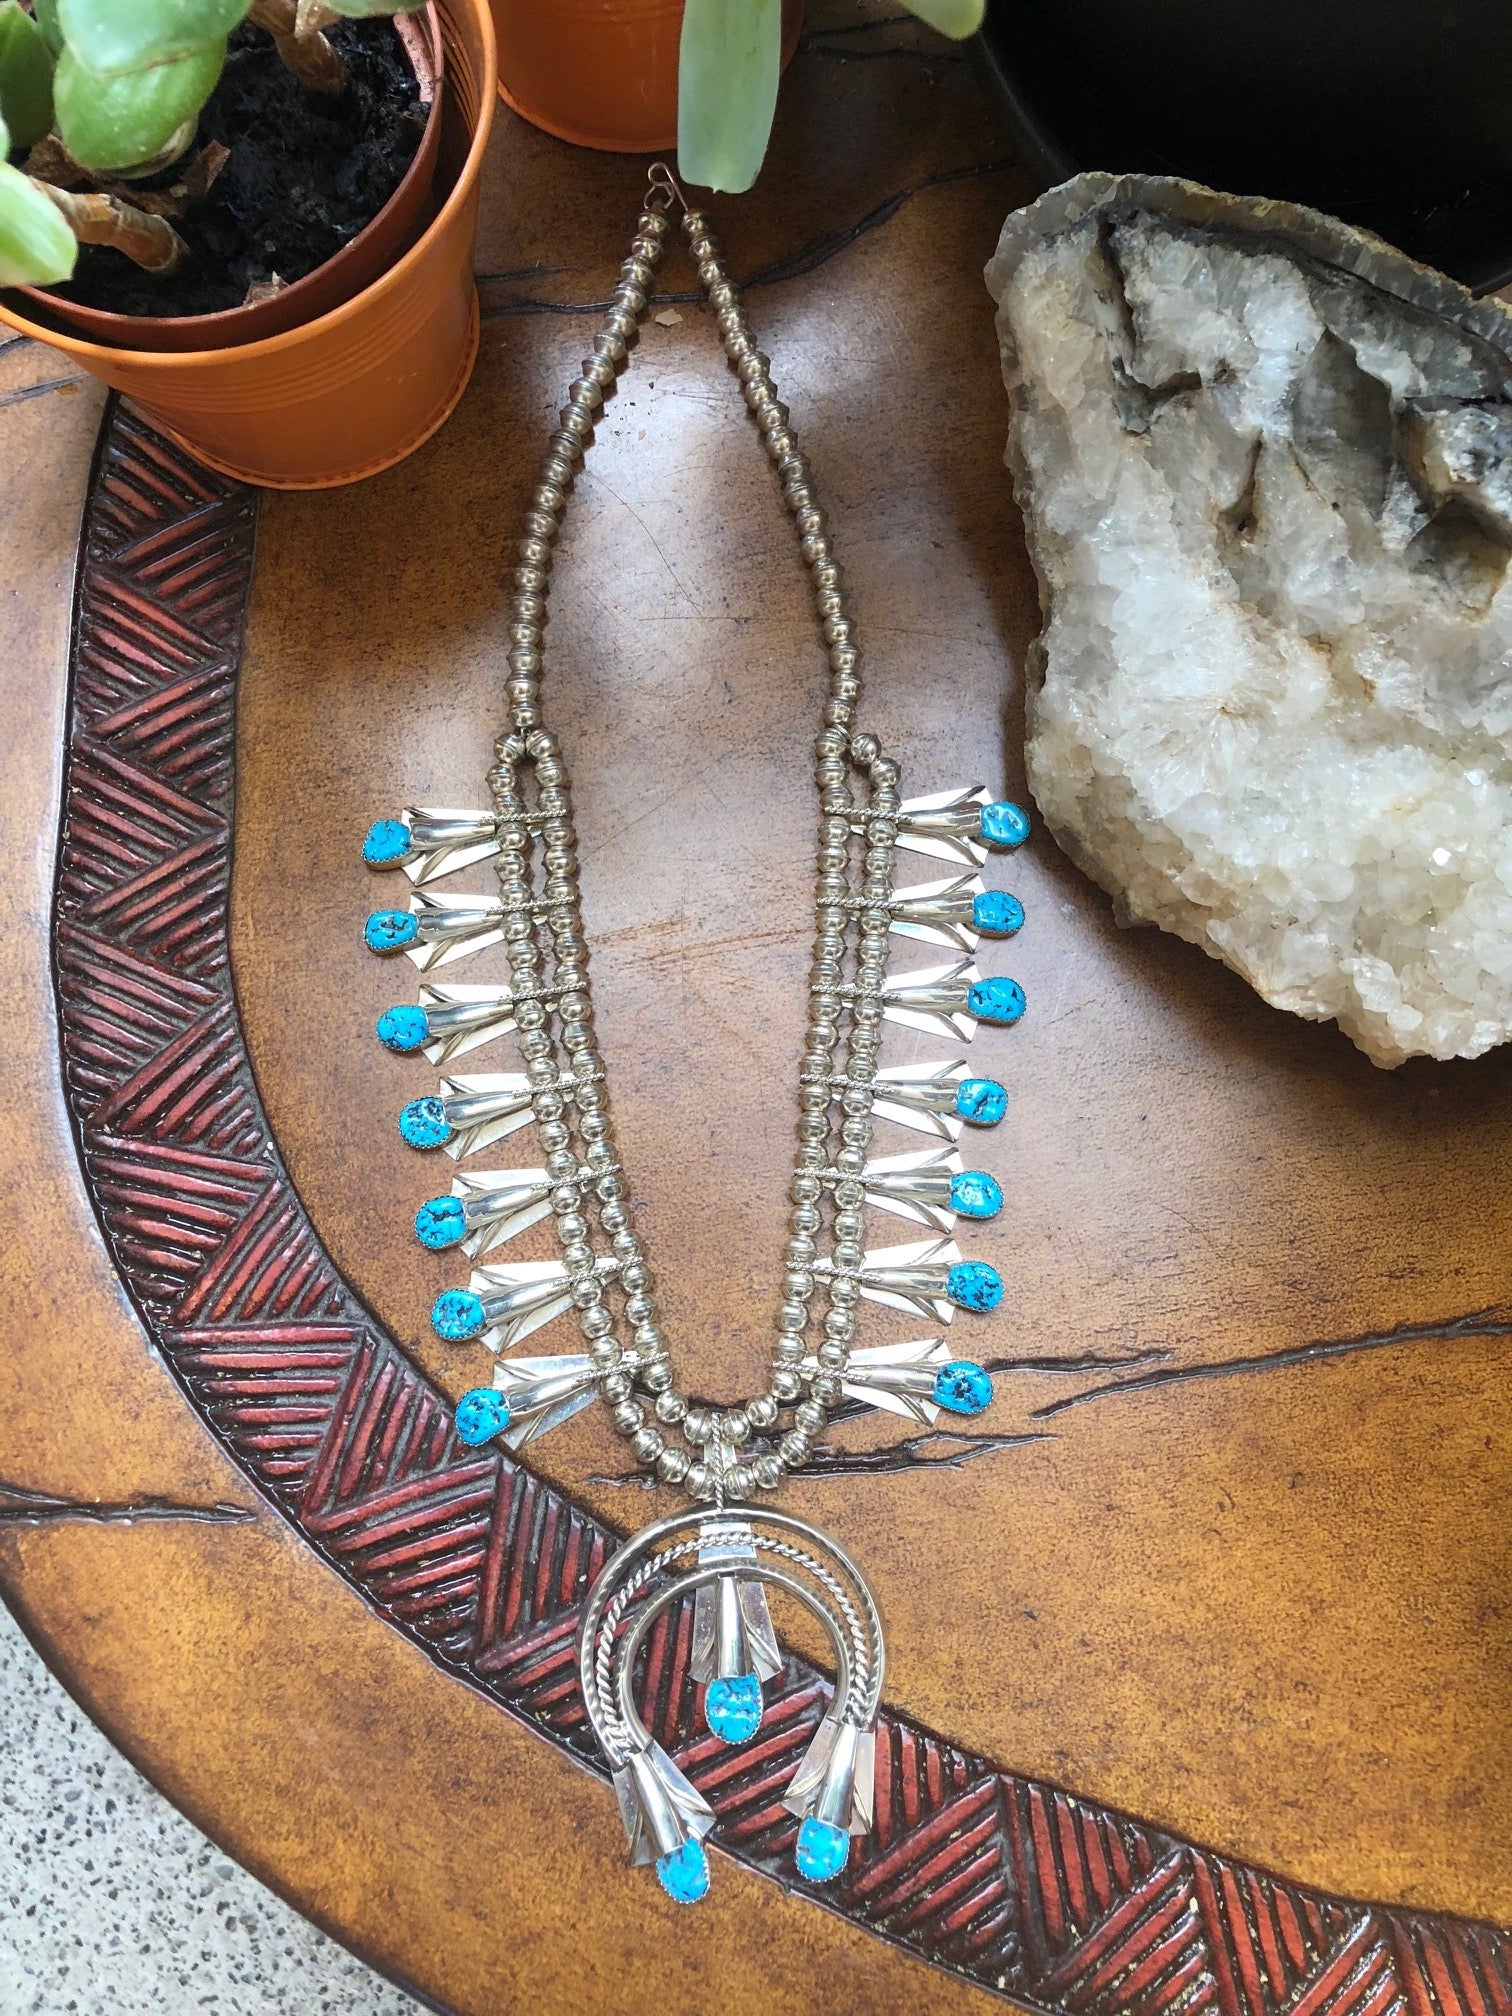 Introduction to Native American jewelry